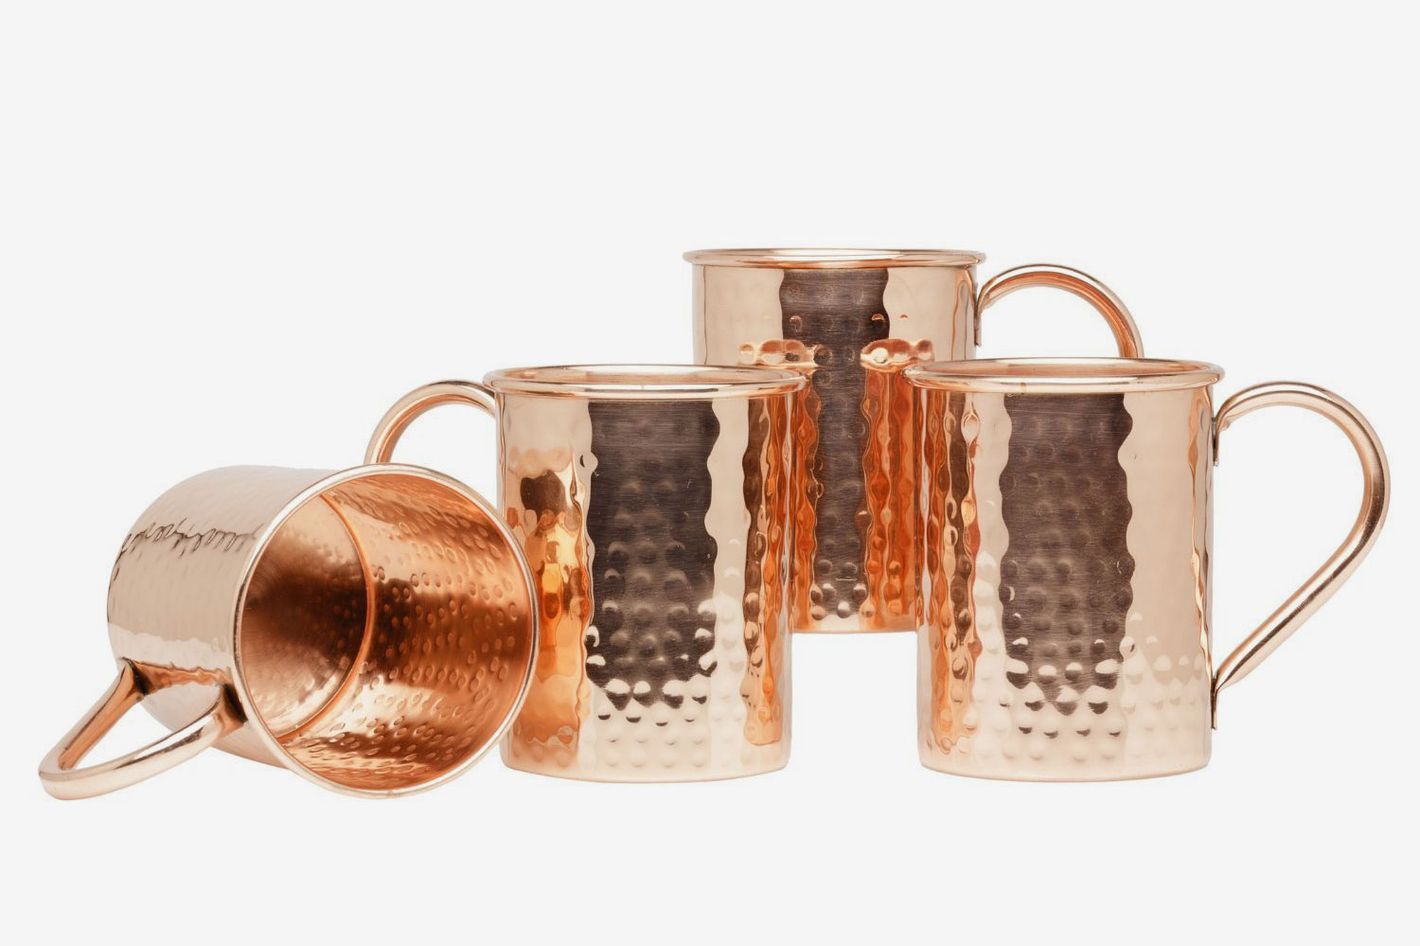 RATNA Moscow Mule Mugs Set of 4 Handcrafted Copper Mug Pure Solid Copper Cups with Hammered Finish 